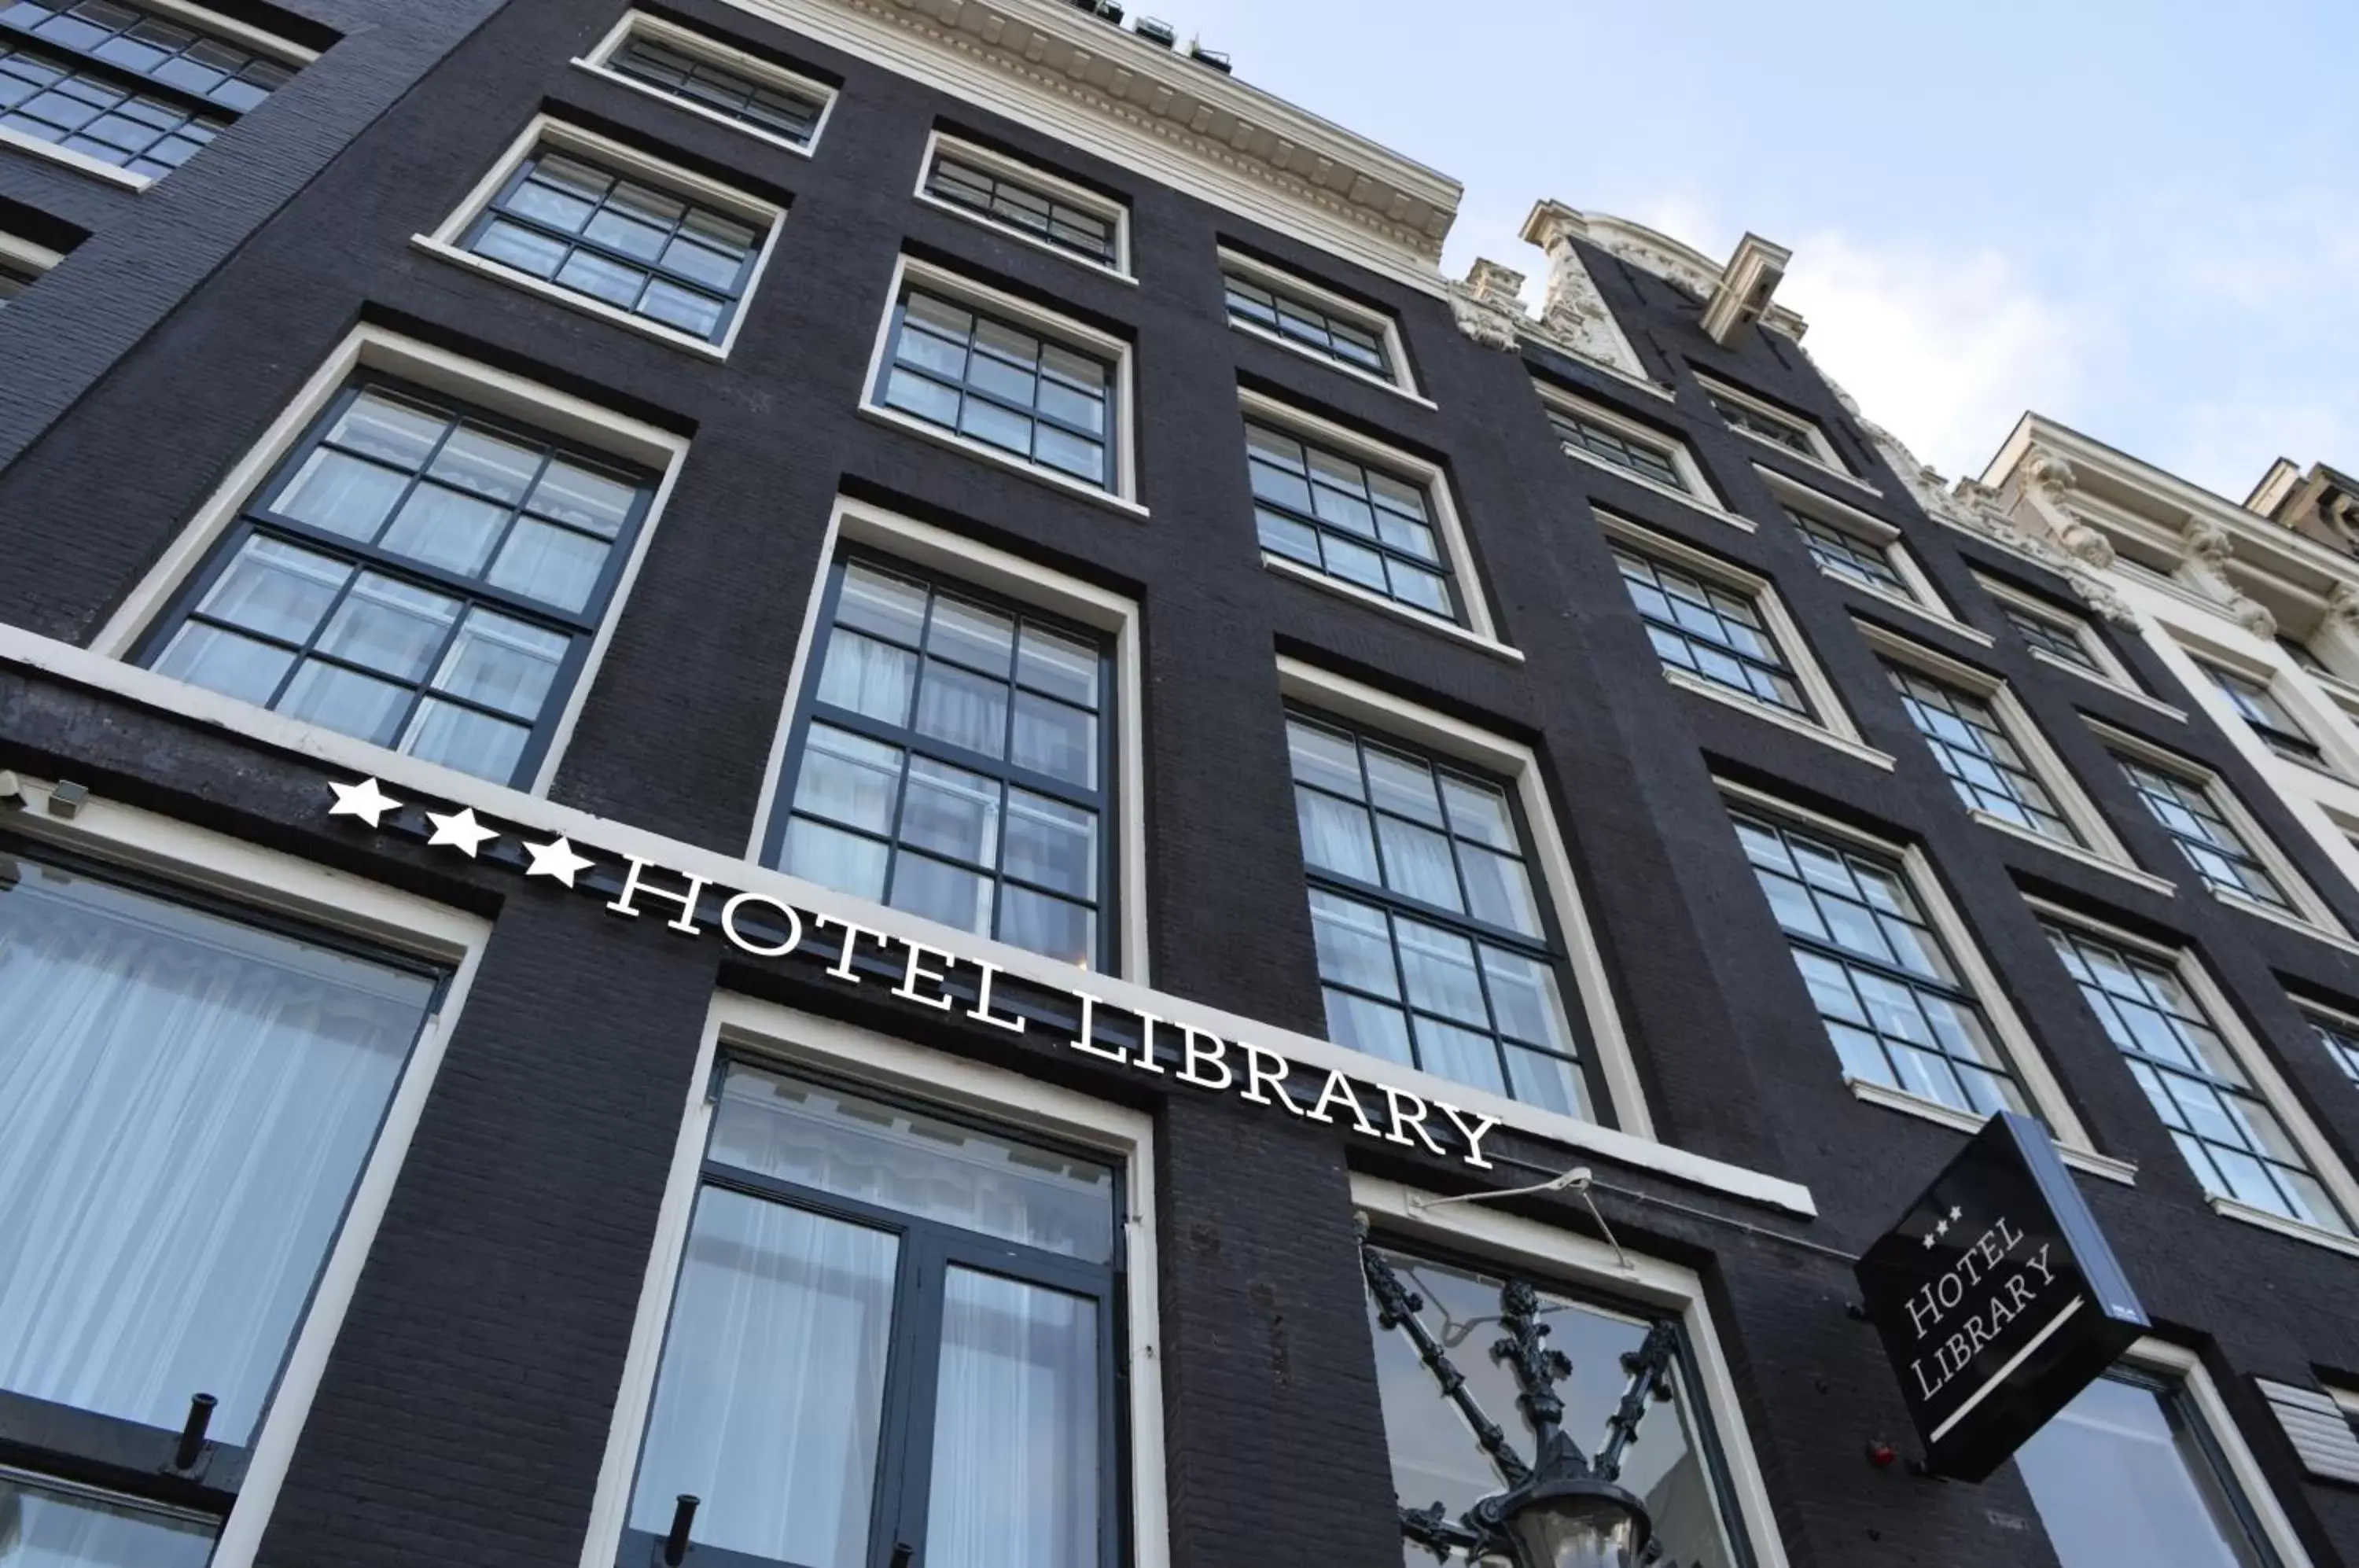 Property Building in Hotel Library Amsterdam